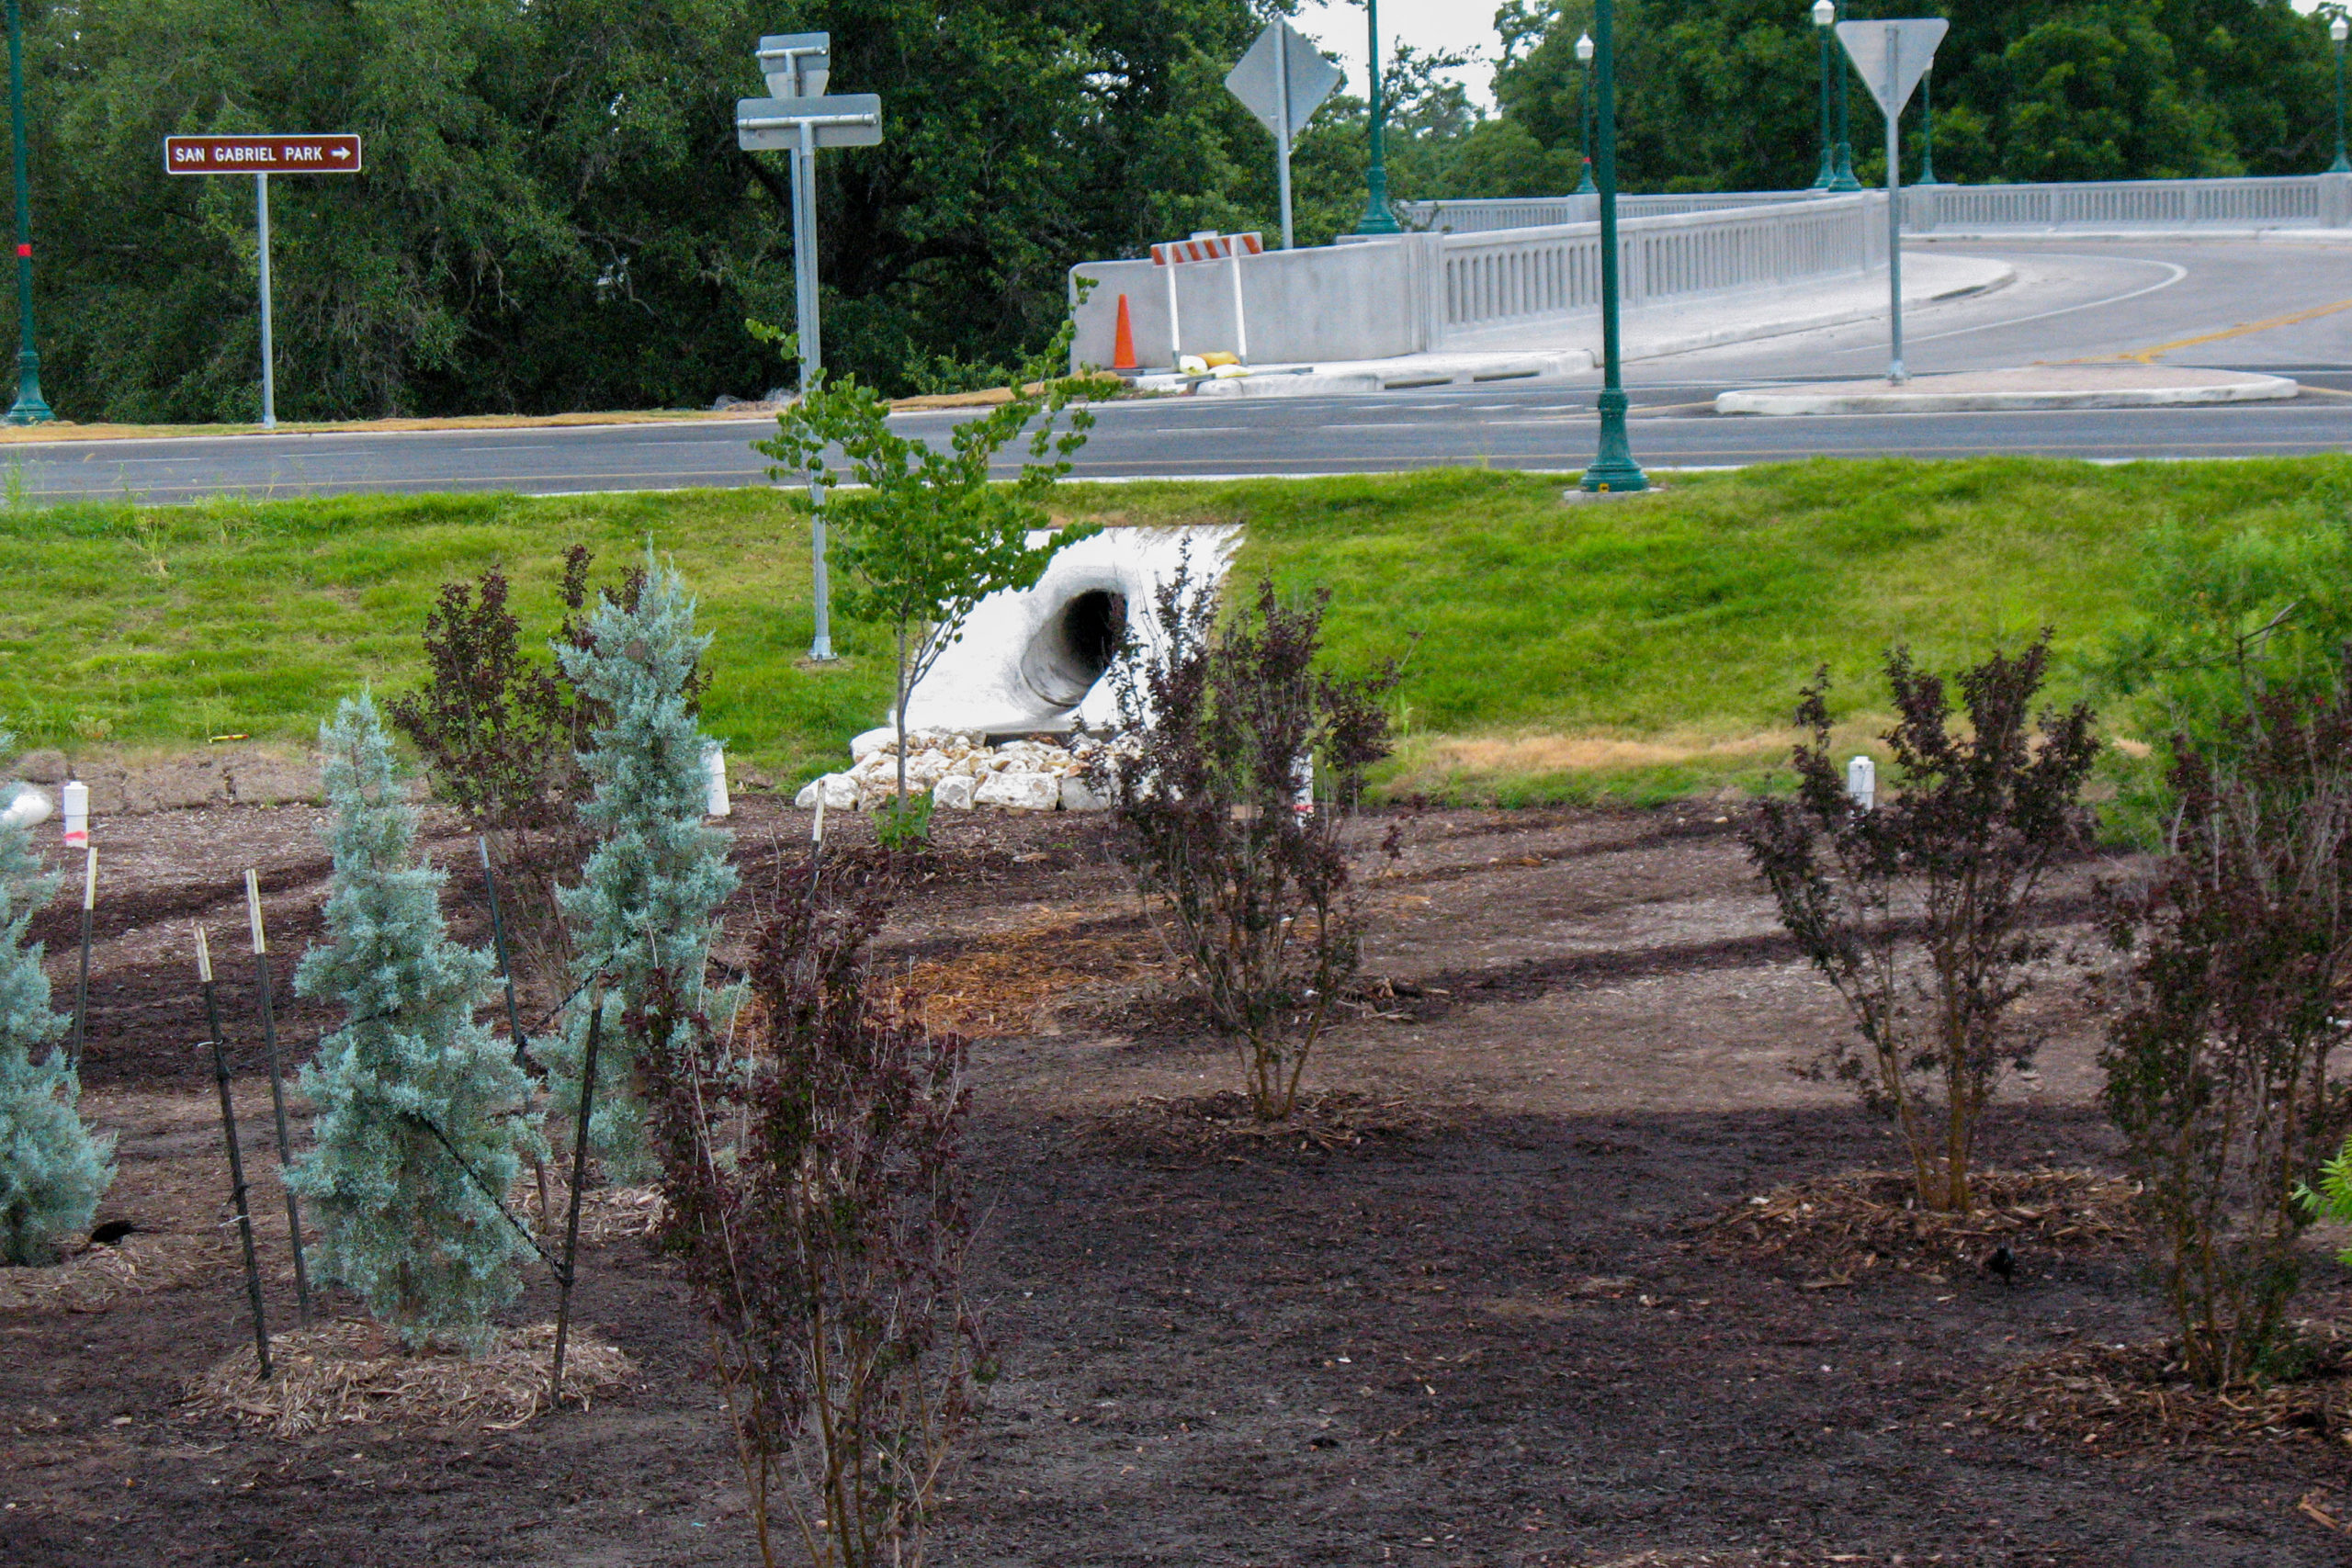 Landscaping in roundabout